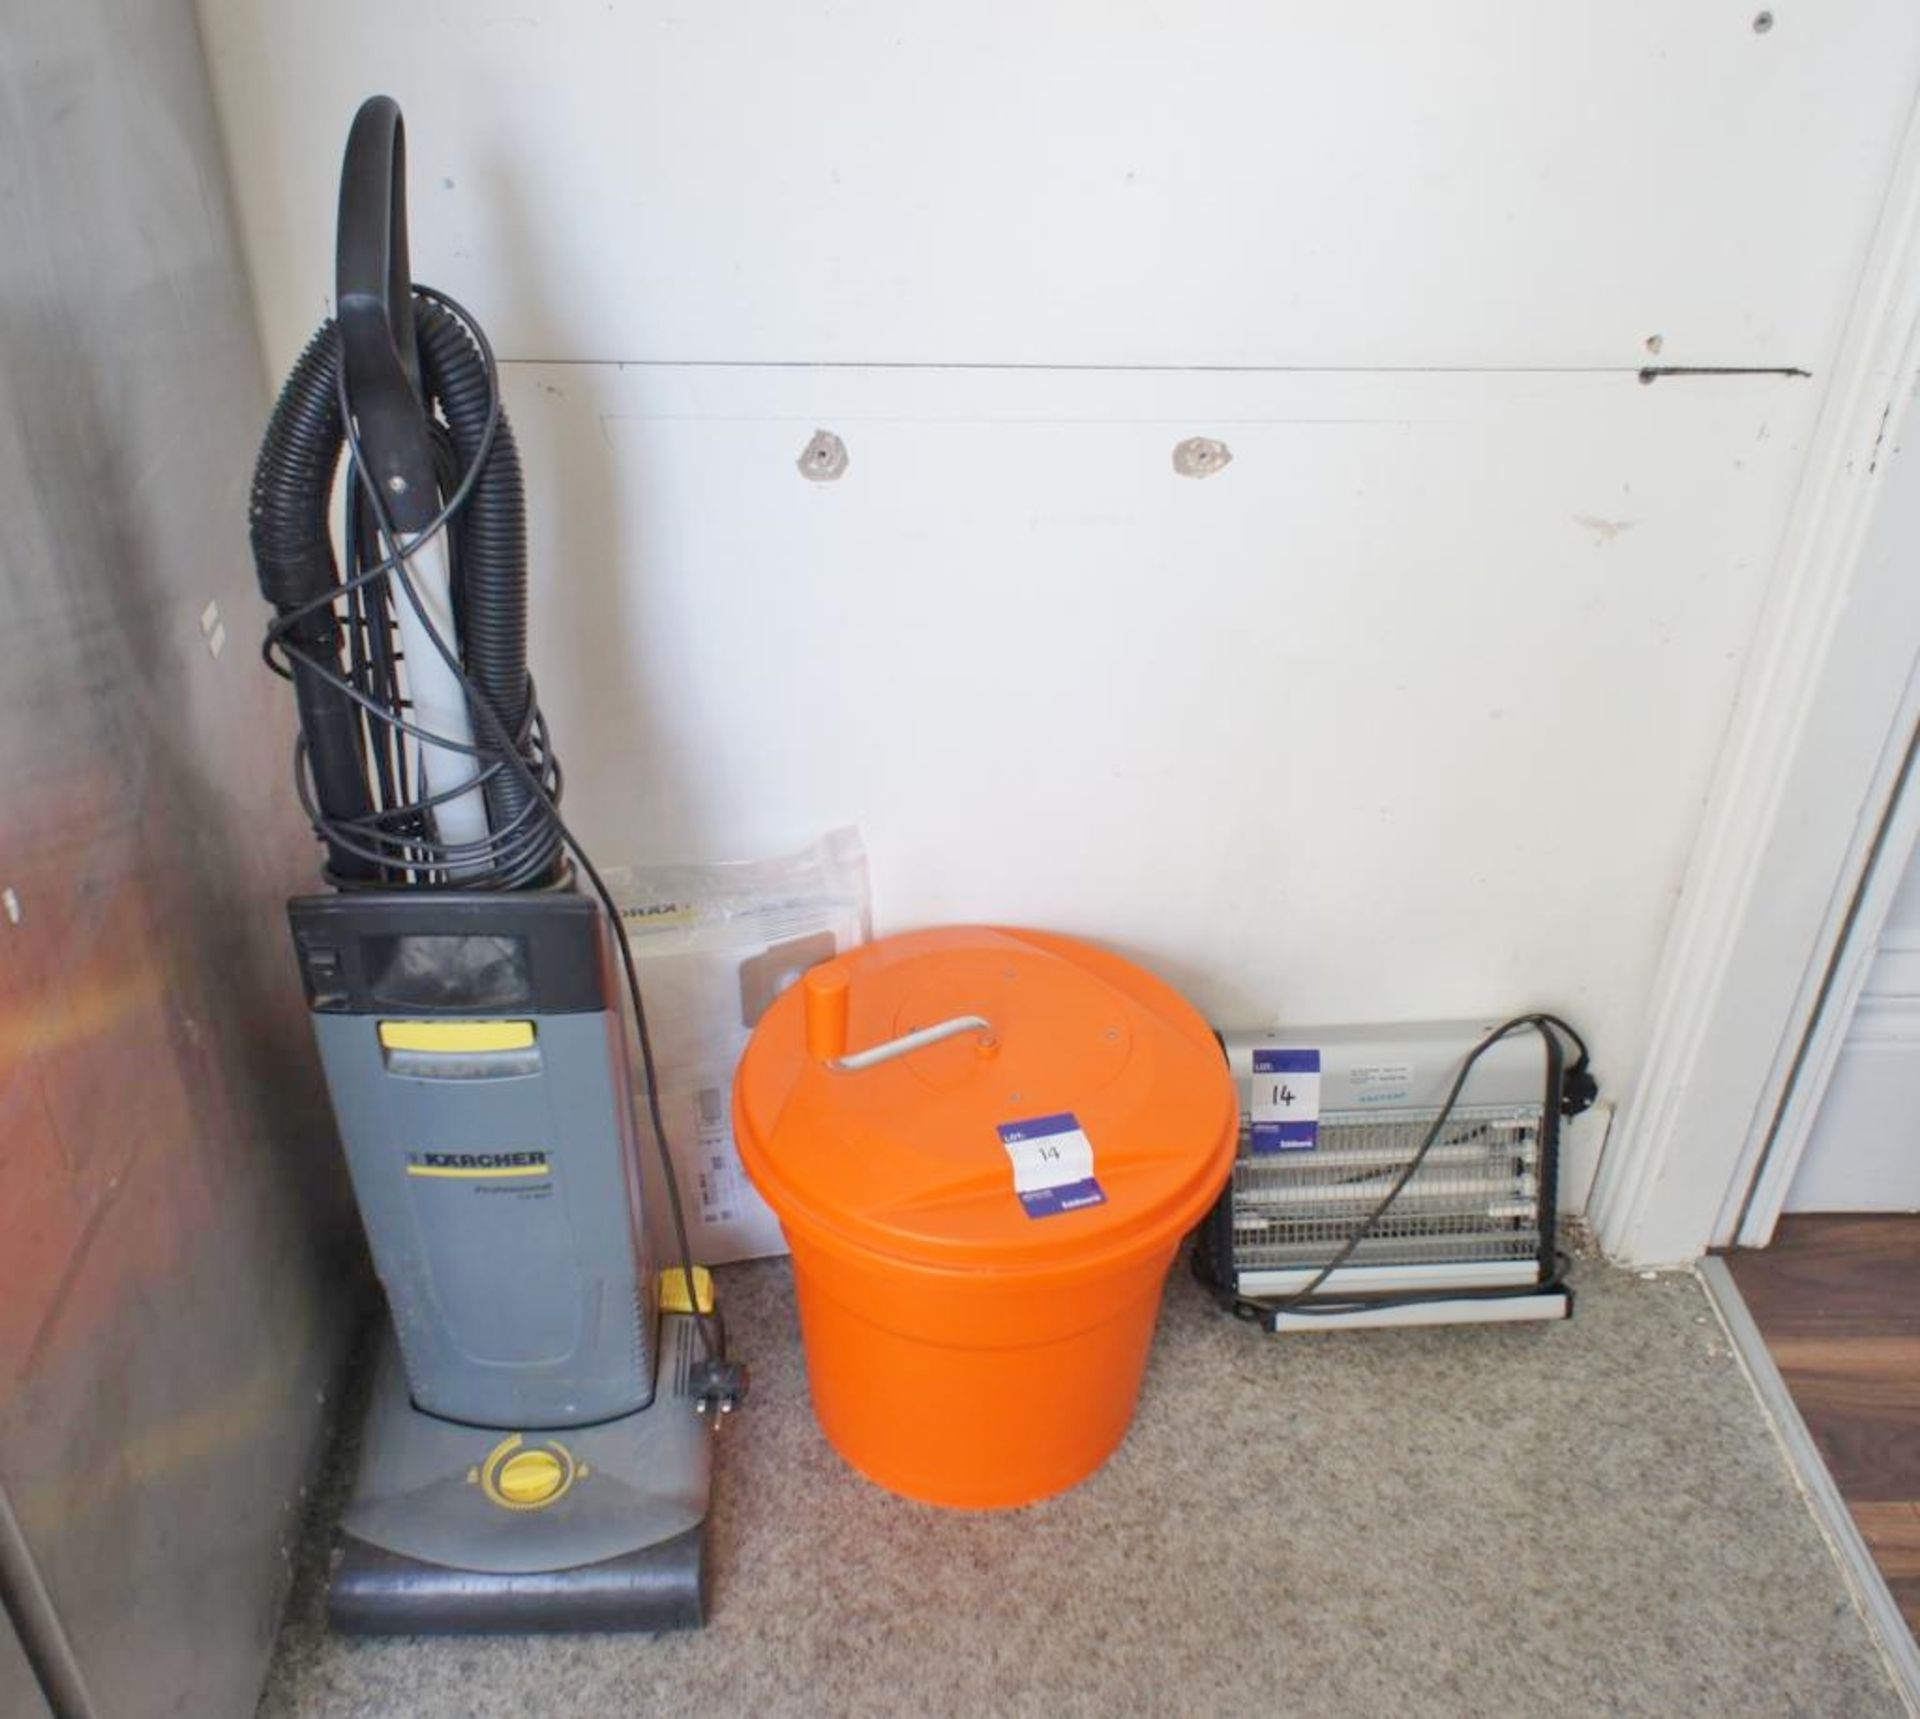 Vacuum Cleaner, Dynamic Mixing Tub & Eazy Zap Insectocutor